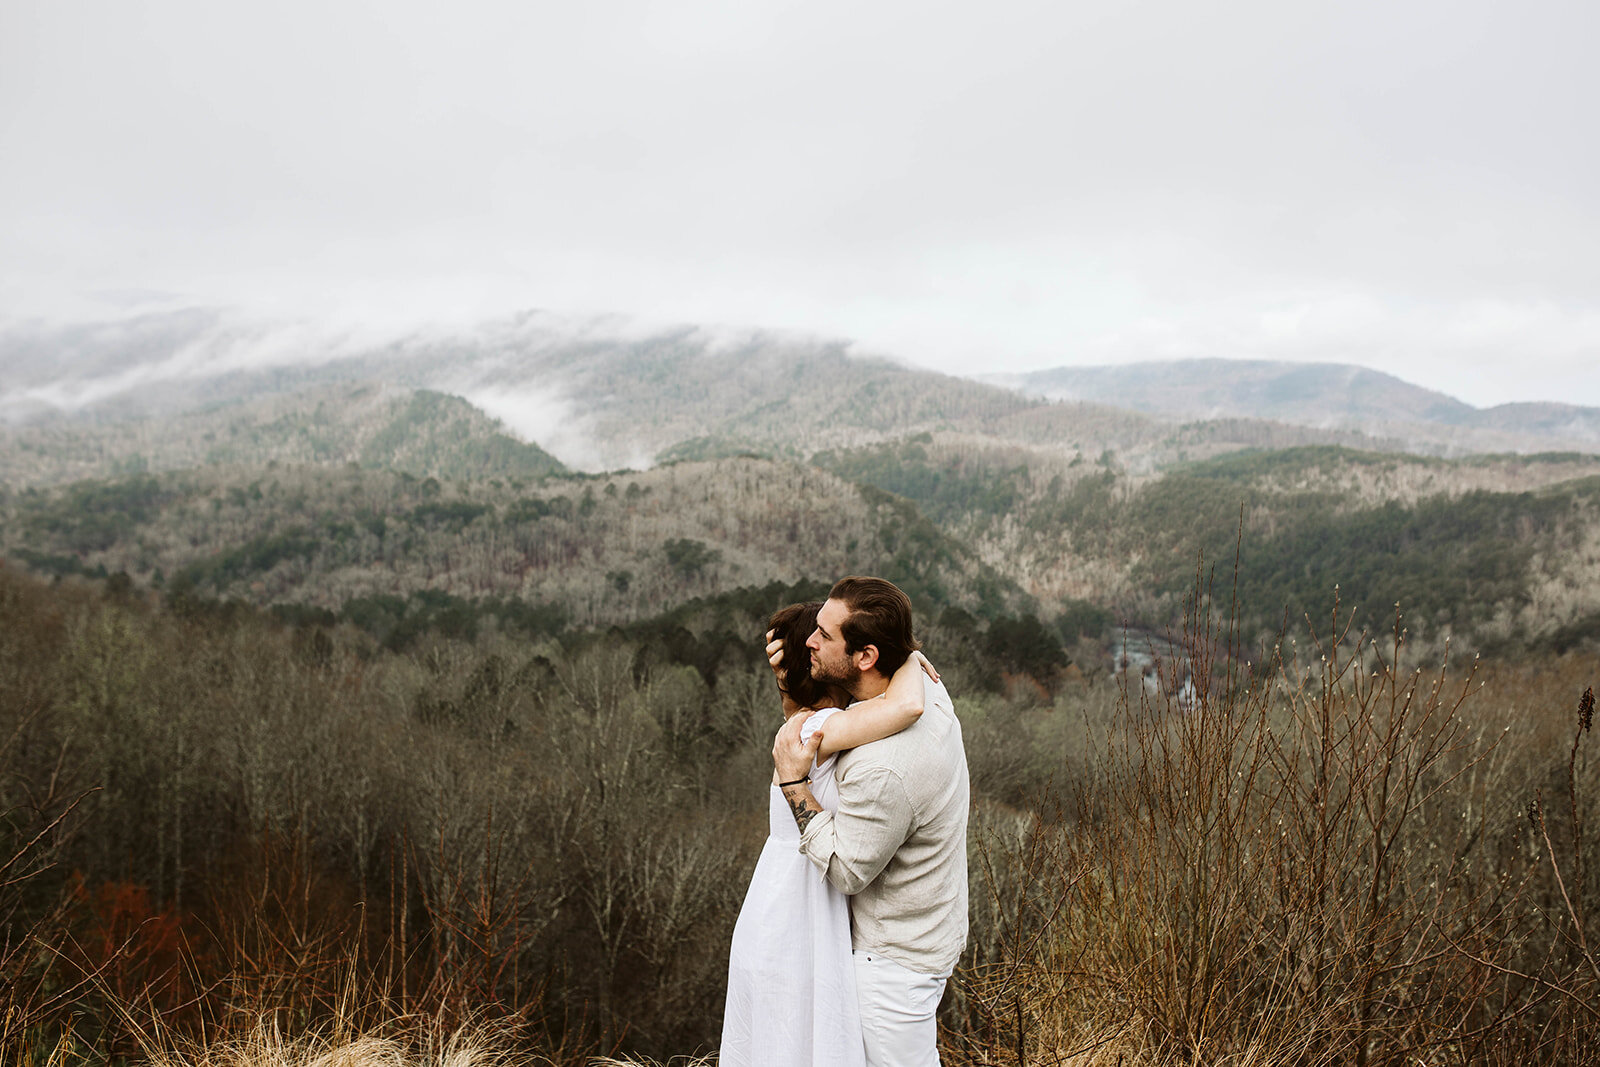 adventure-engagement-in-the-great-smoky-mountains-chattanooga-elopement-photographer5Y6A5077_websize.jpg